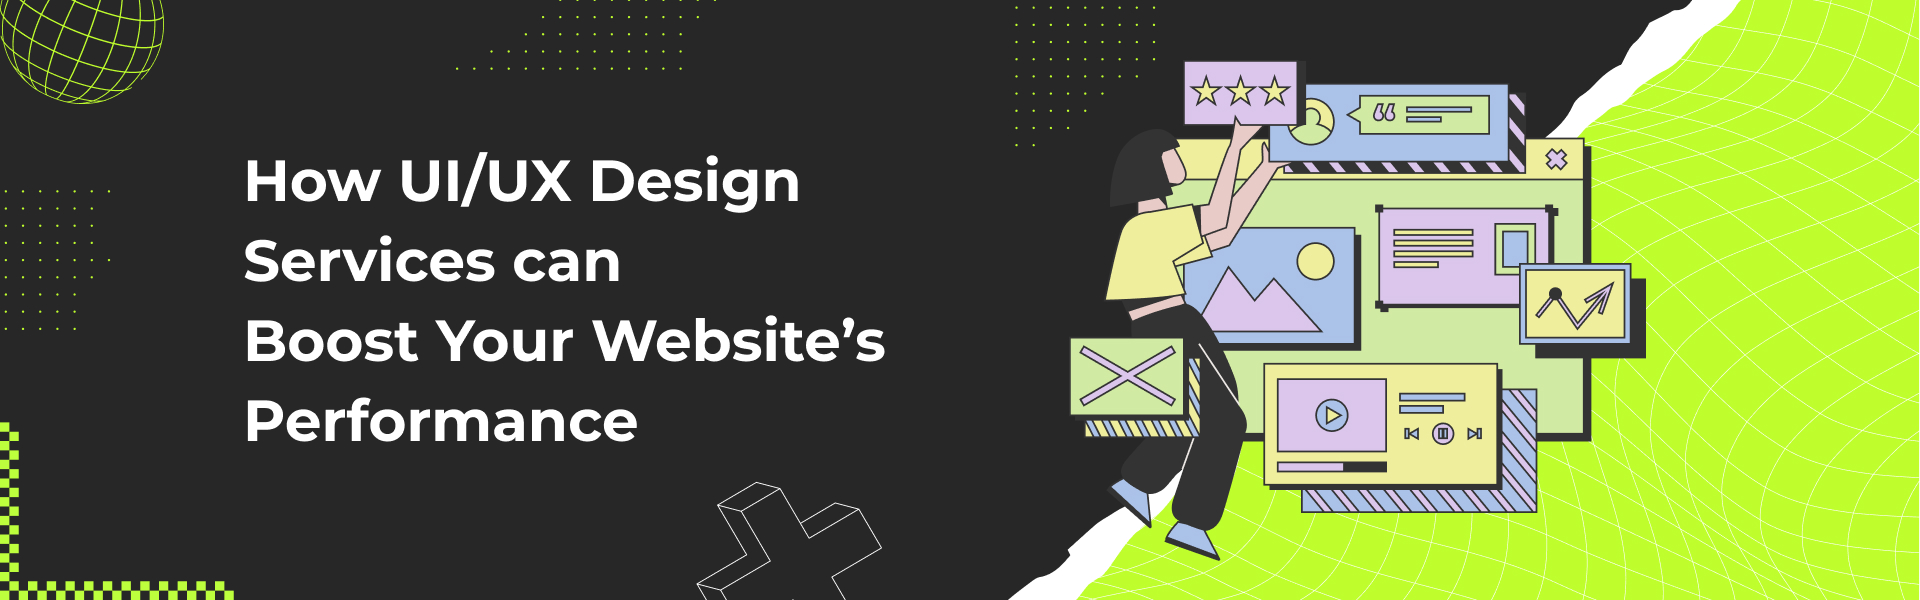 UX Design Services Can Boost Your Website's Performance (1)